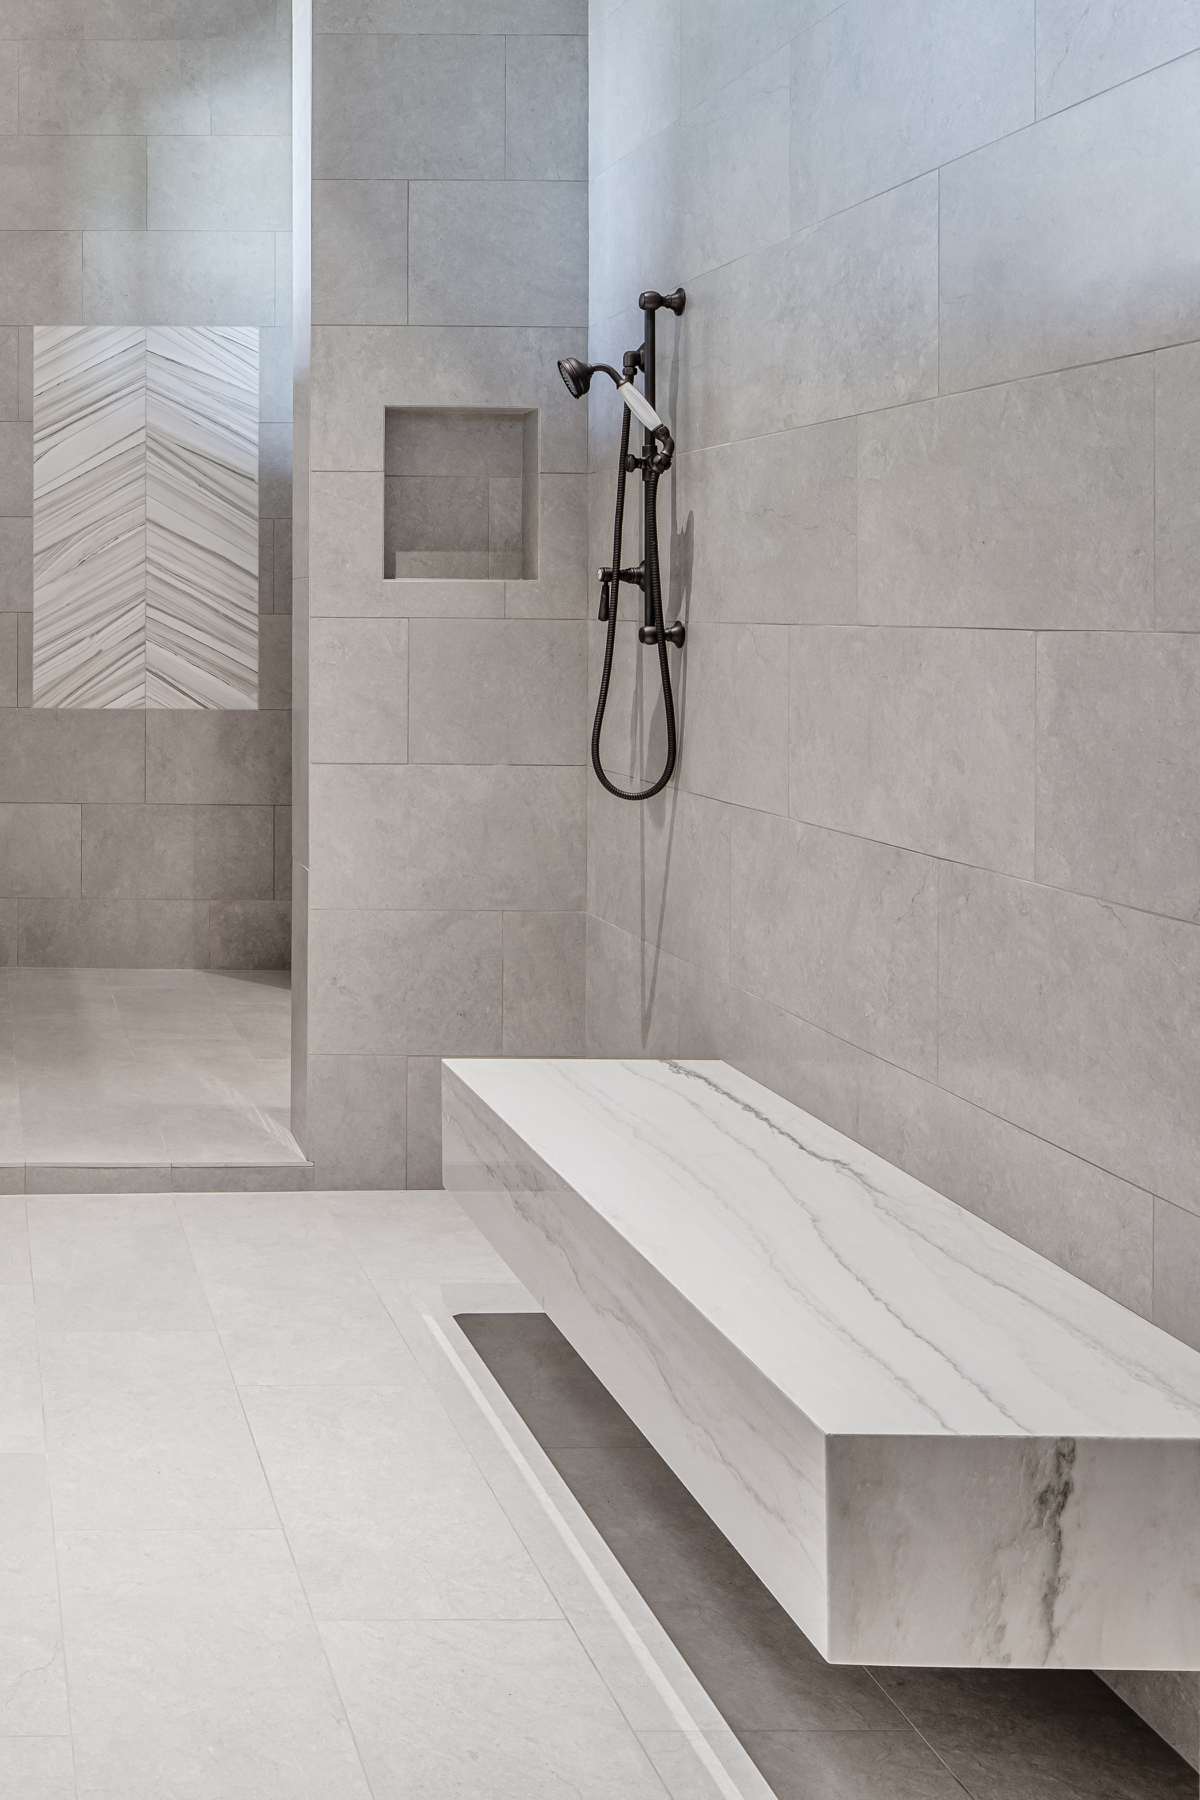 Interior view of the main bathroom shower at Texas Ranch, a custom home designed and built by Farmer Payne Architects.